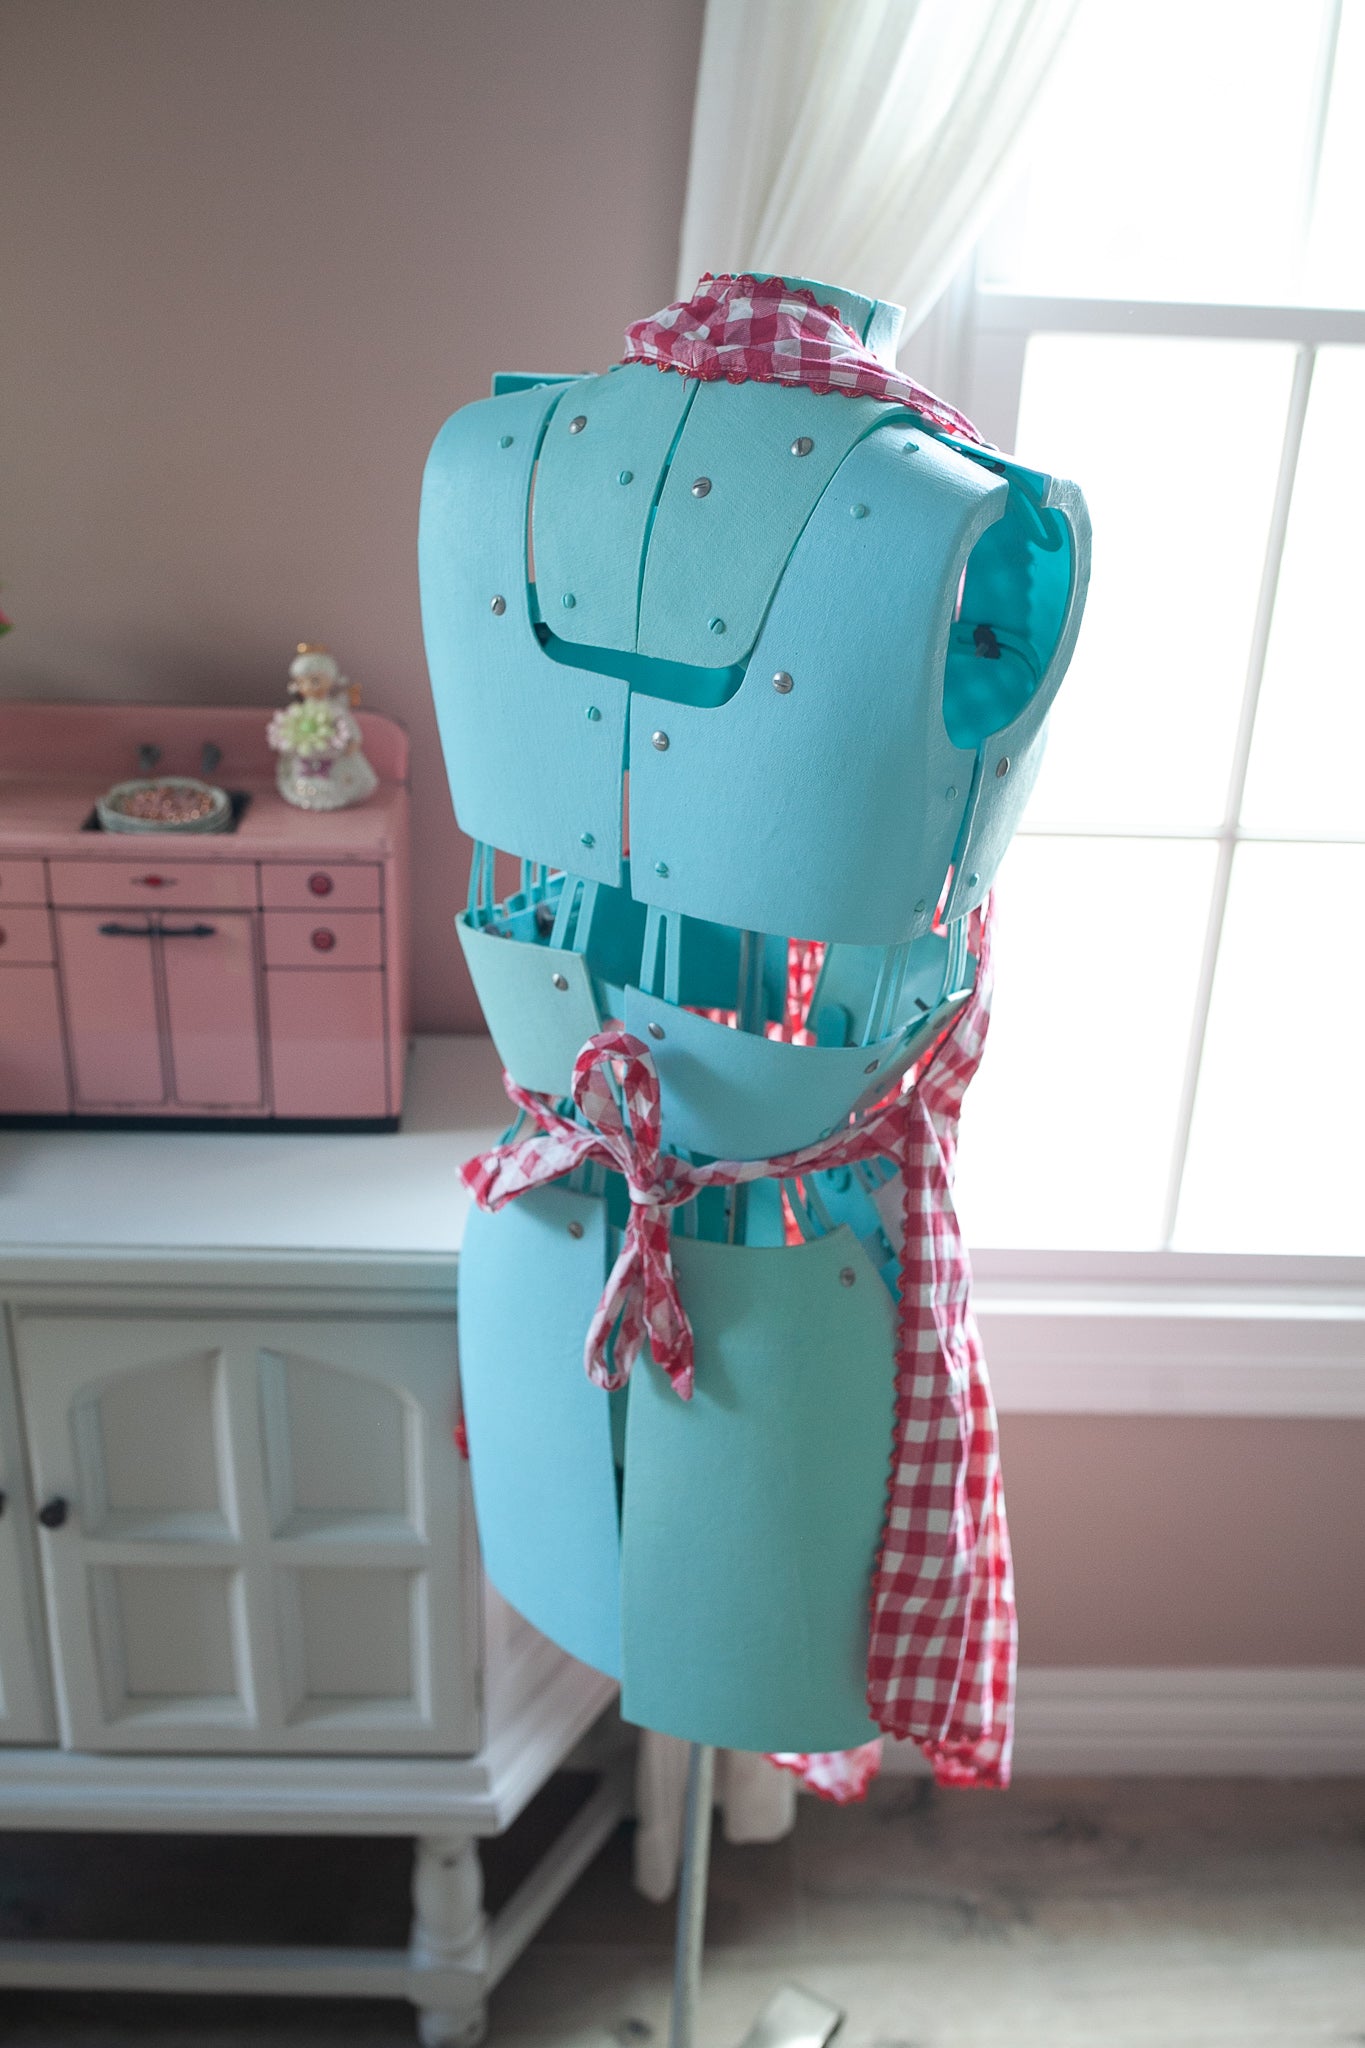 Vintage Apron- Full apron Red and White Apron